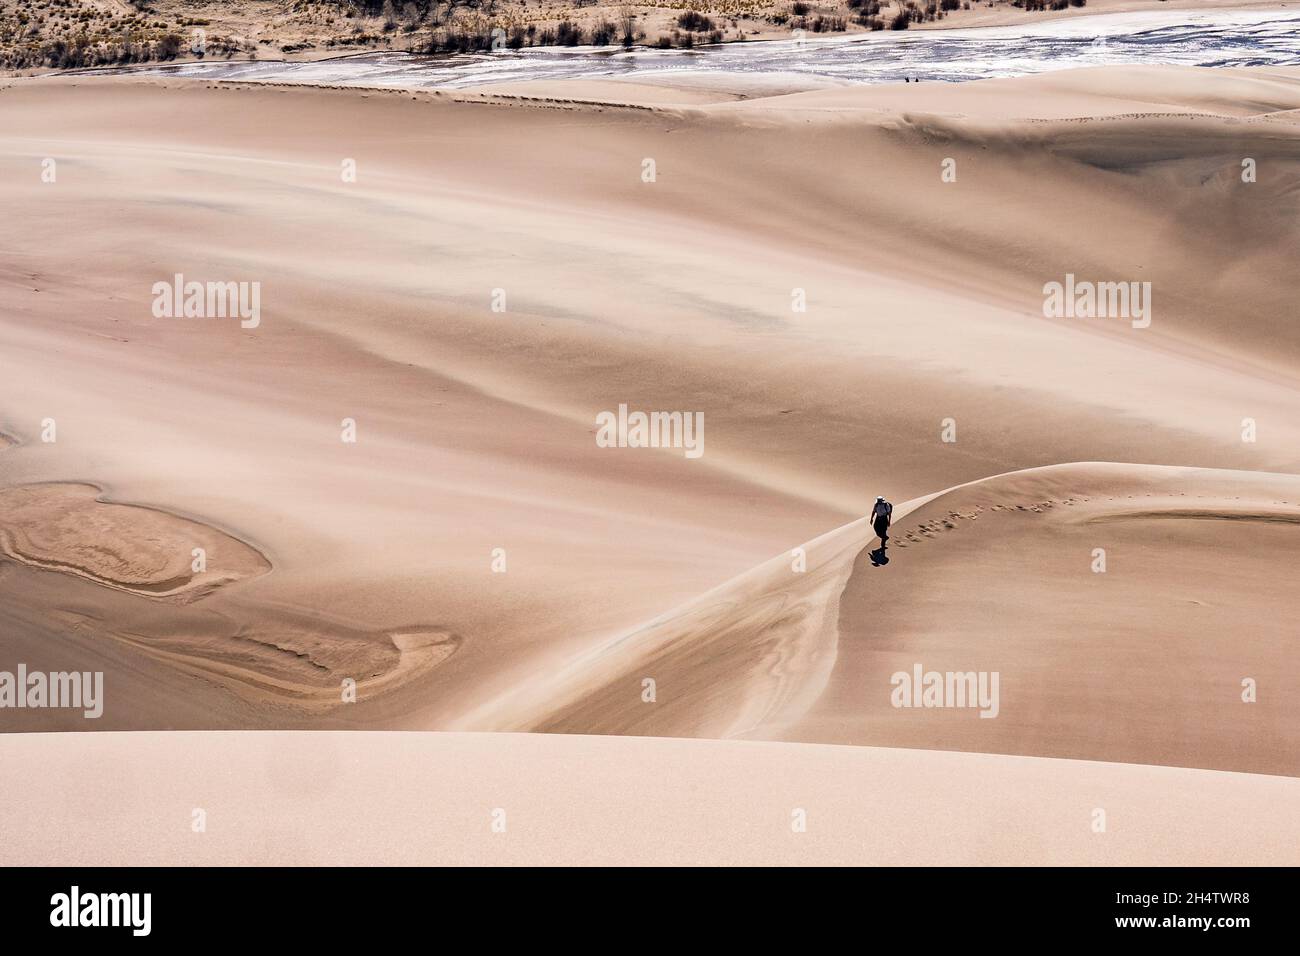 Mosca, CO - April 24, 2021: A solitary hiker walks alone the dunes in Great Sand Dunes National Park Stock Photo